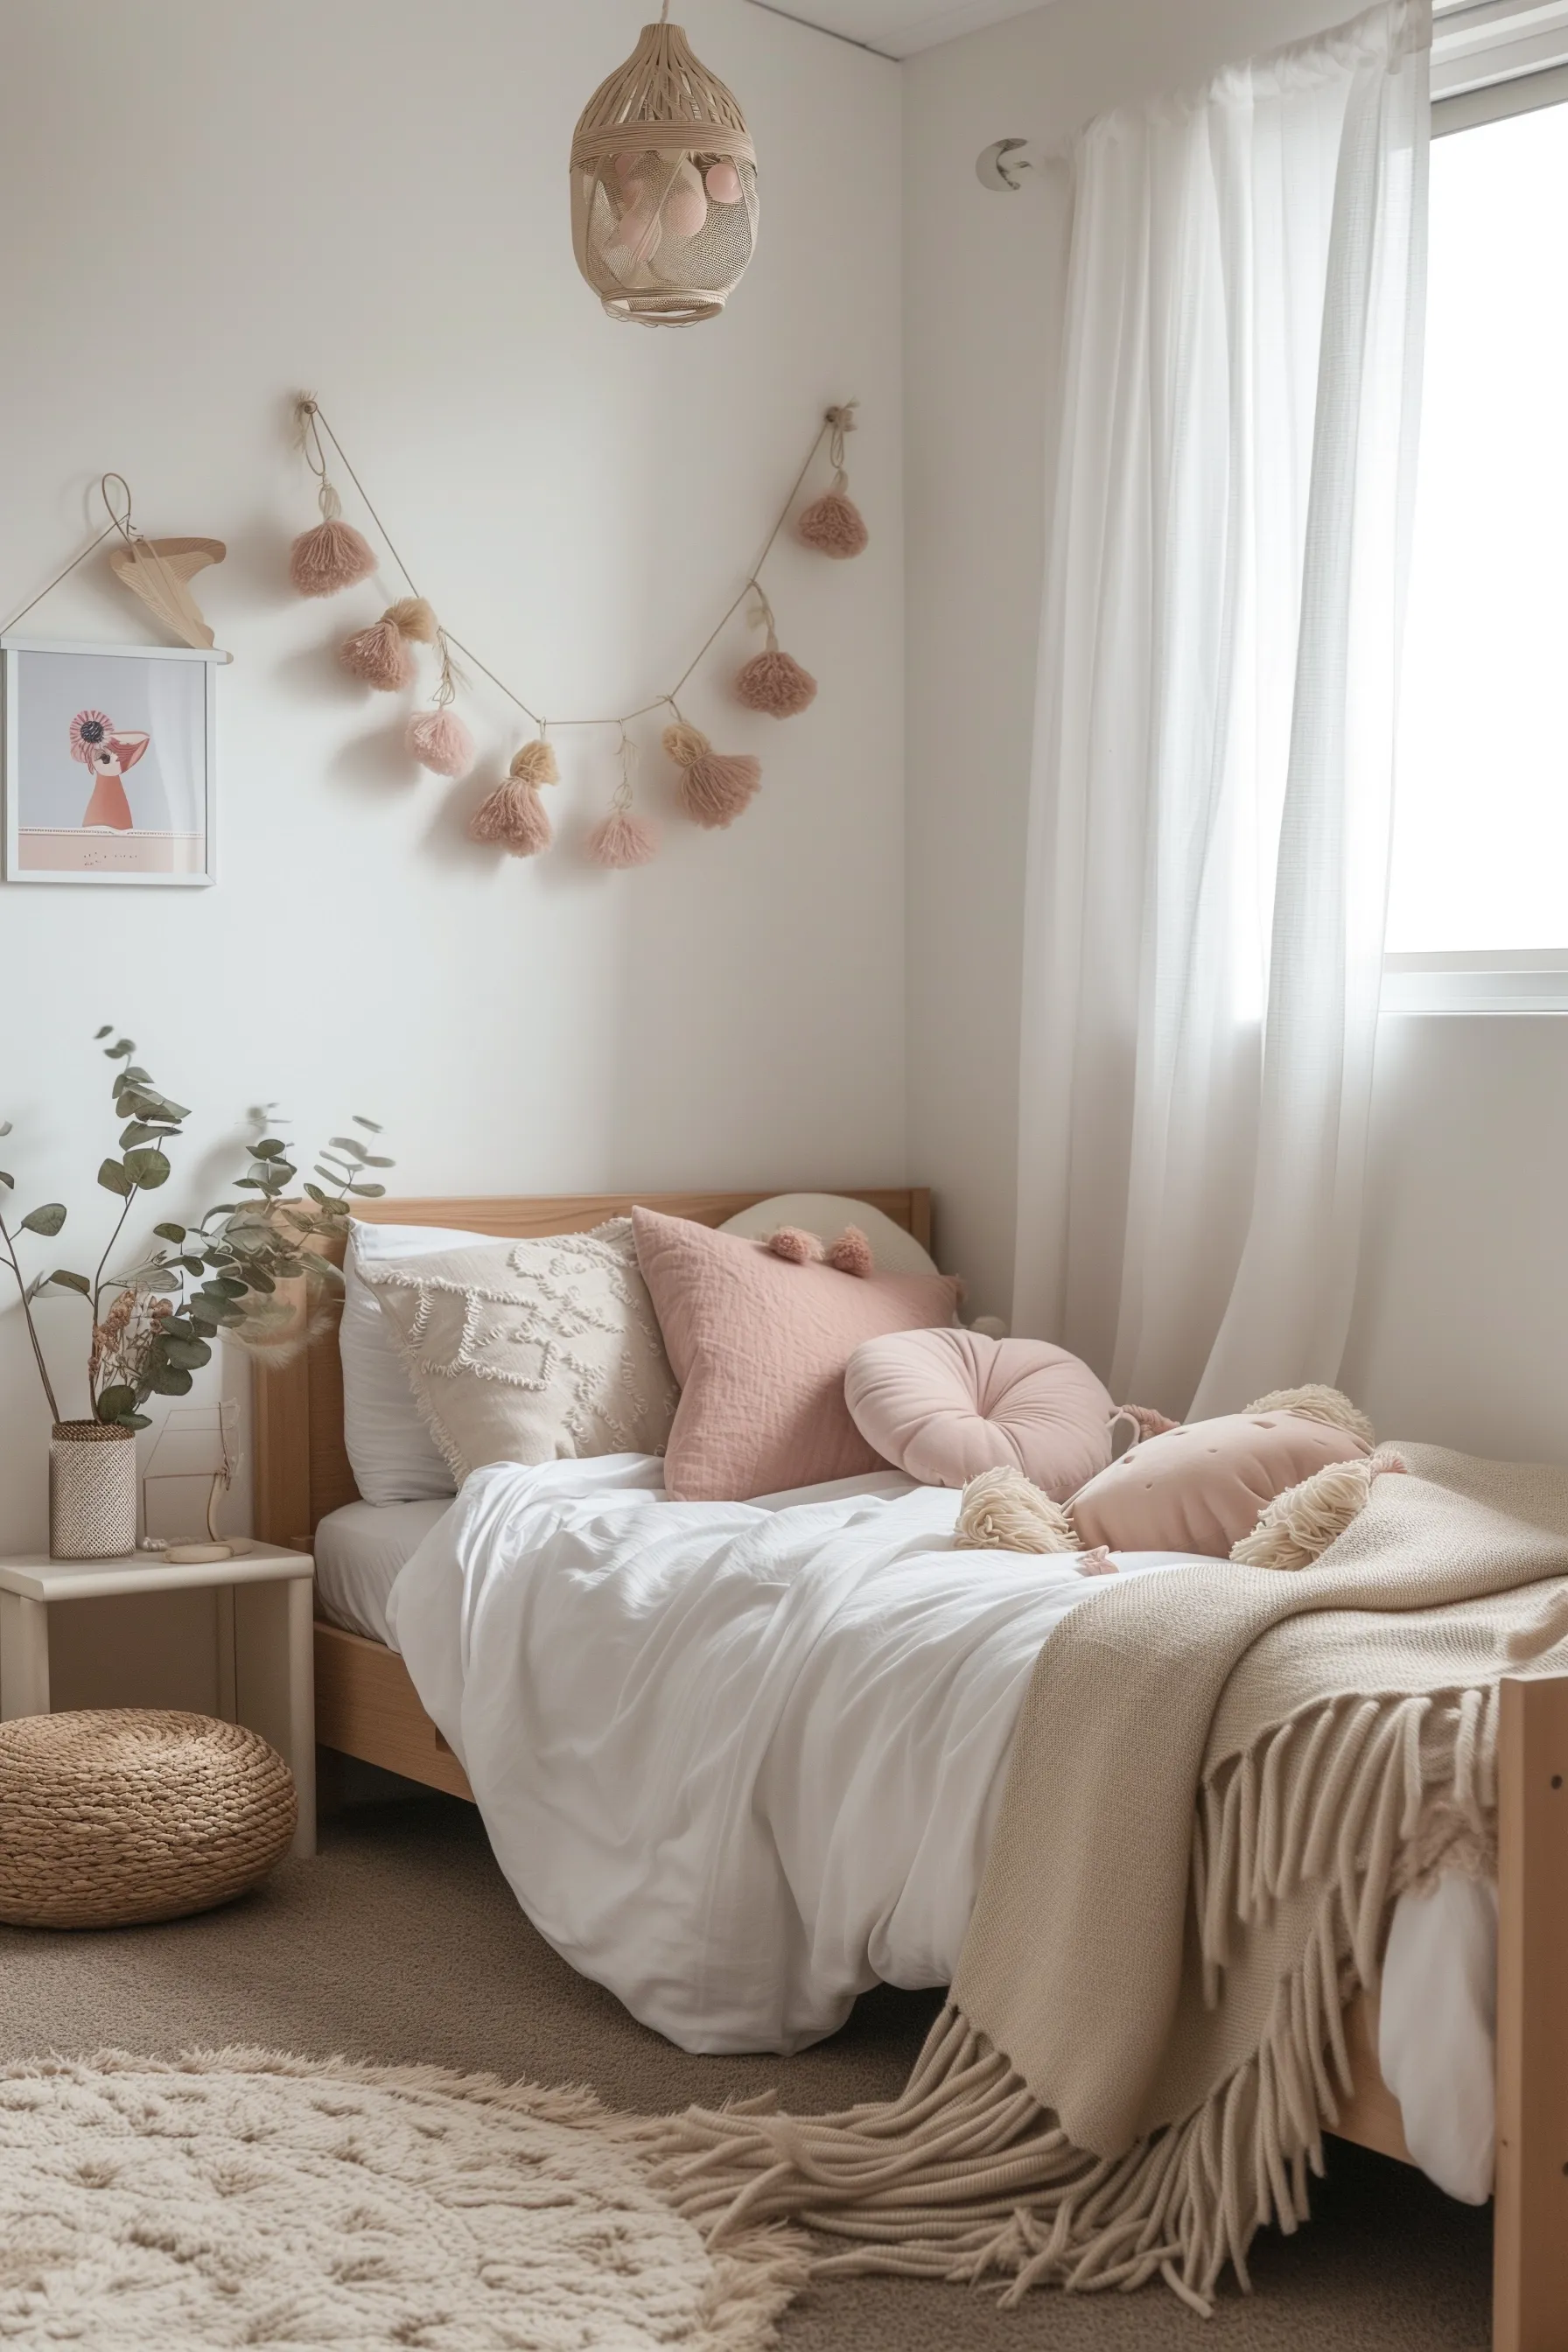 A white and pink bedroom with an ottoman and hanging tassles